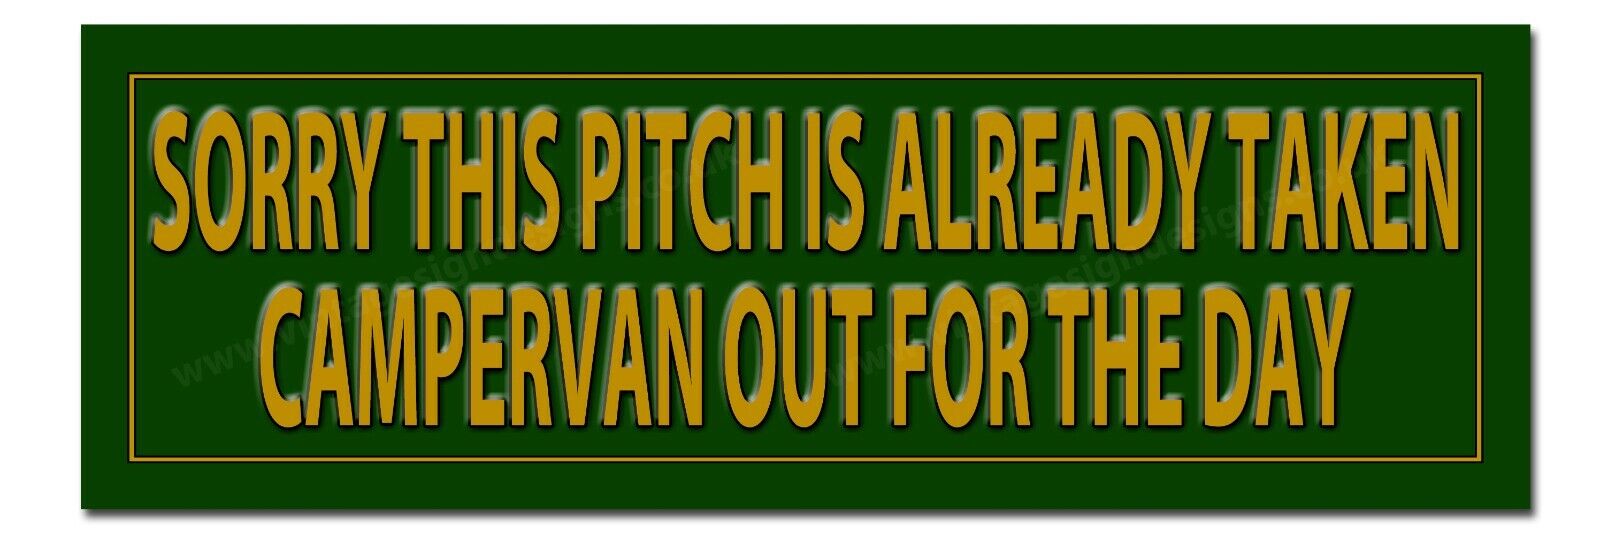 SORRY THIS PITCH IS ALREADY TAKEN - CAMPER VAN OUT FOR THE DAY METAL SIGN